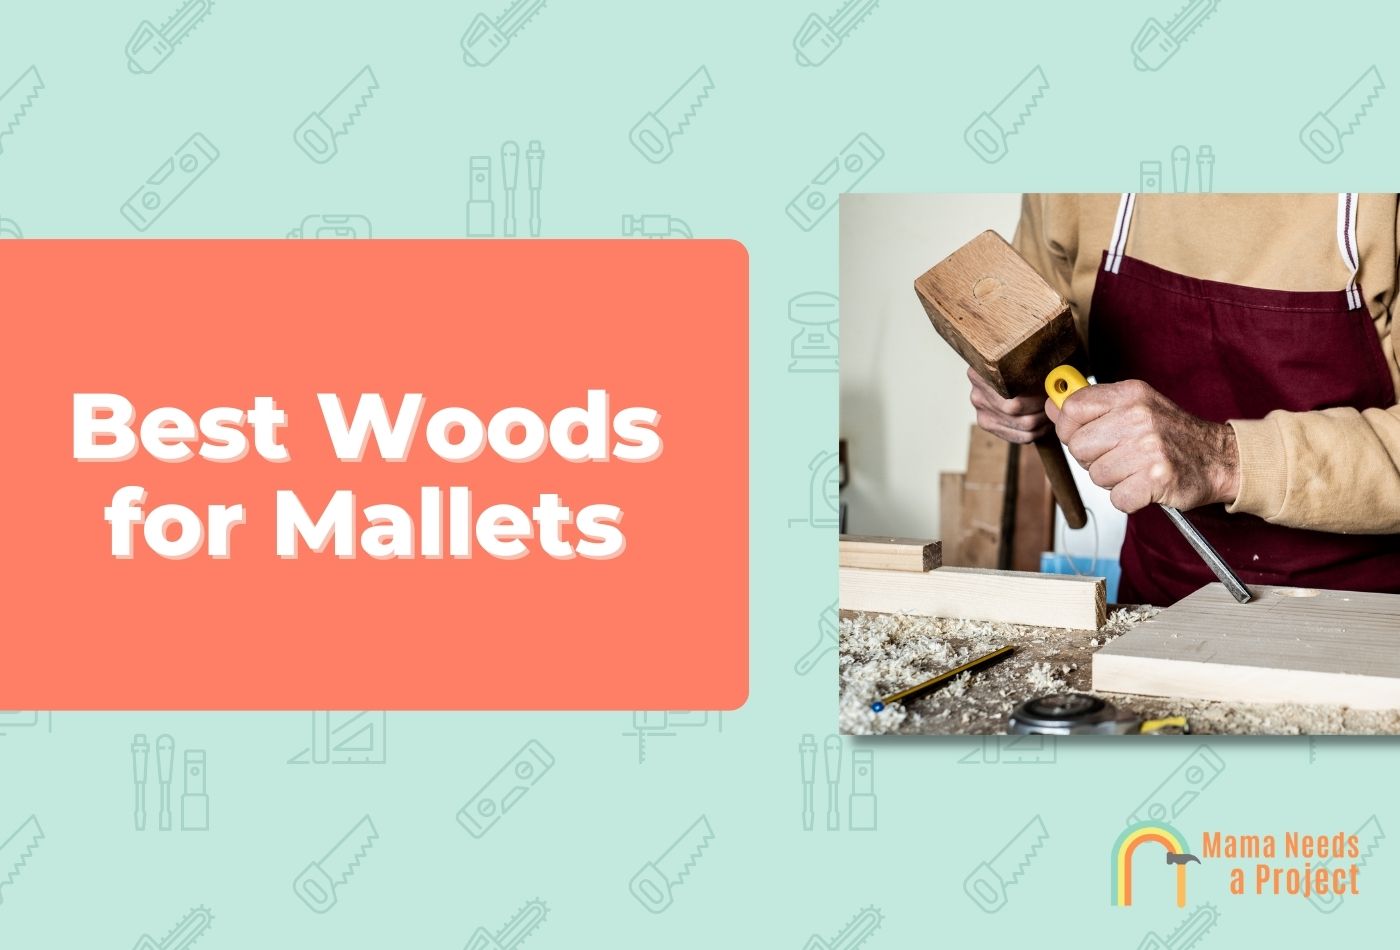 Best Woods for Mallets